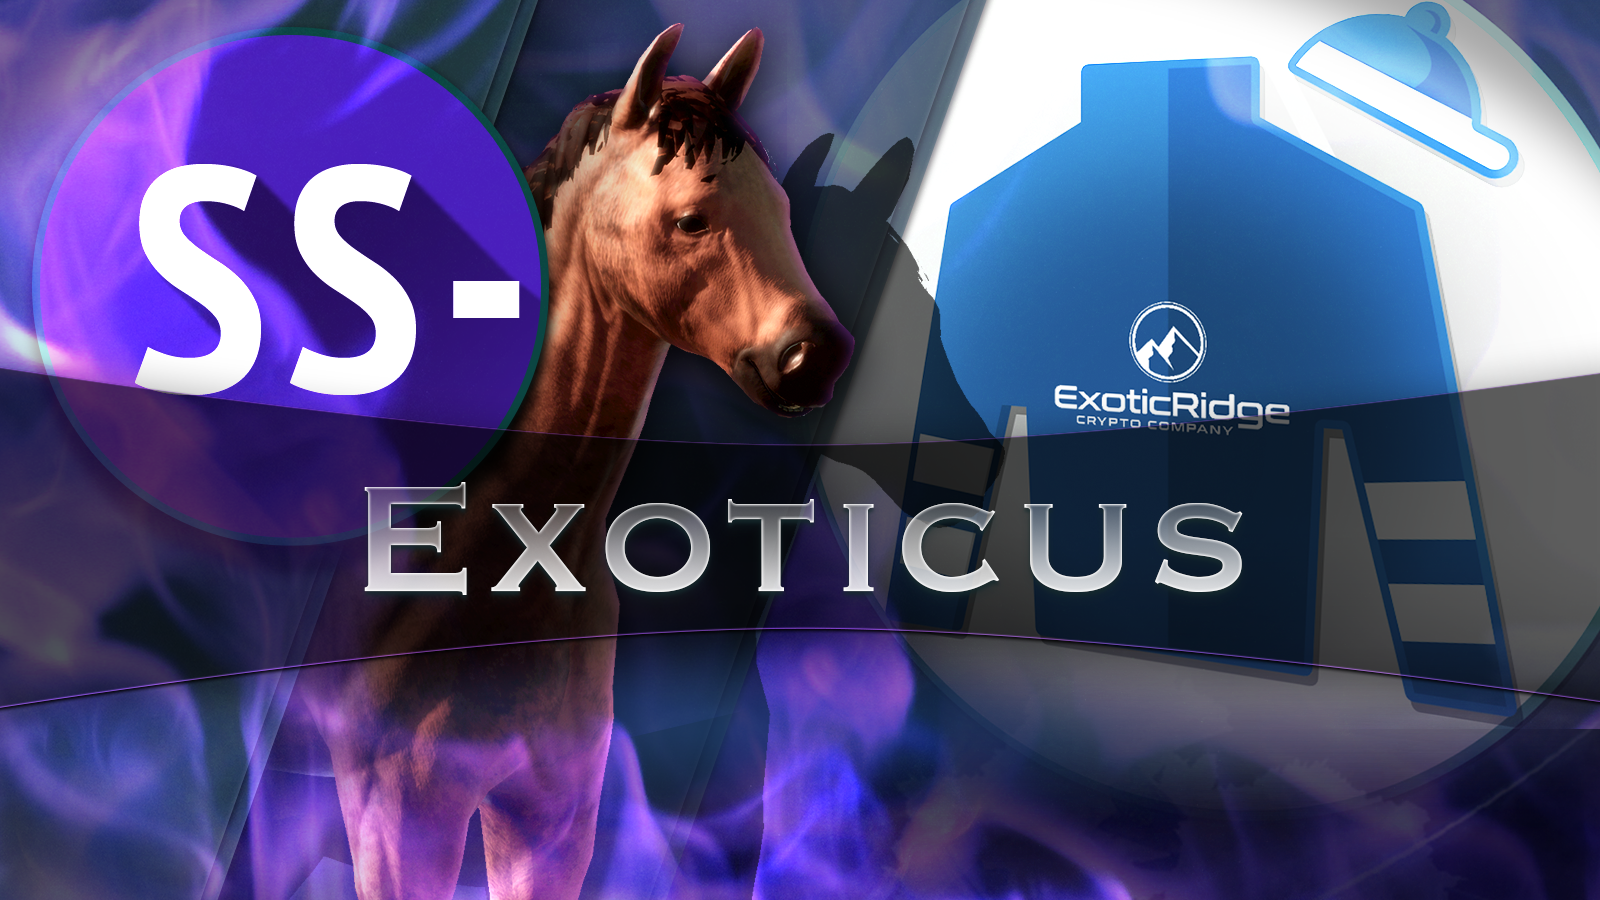 History is Born: Meet ‘Exoticus’ the First-Ever SS- Grade Racehorse